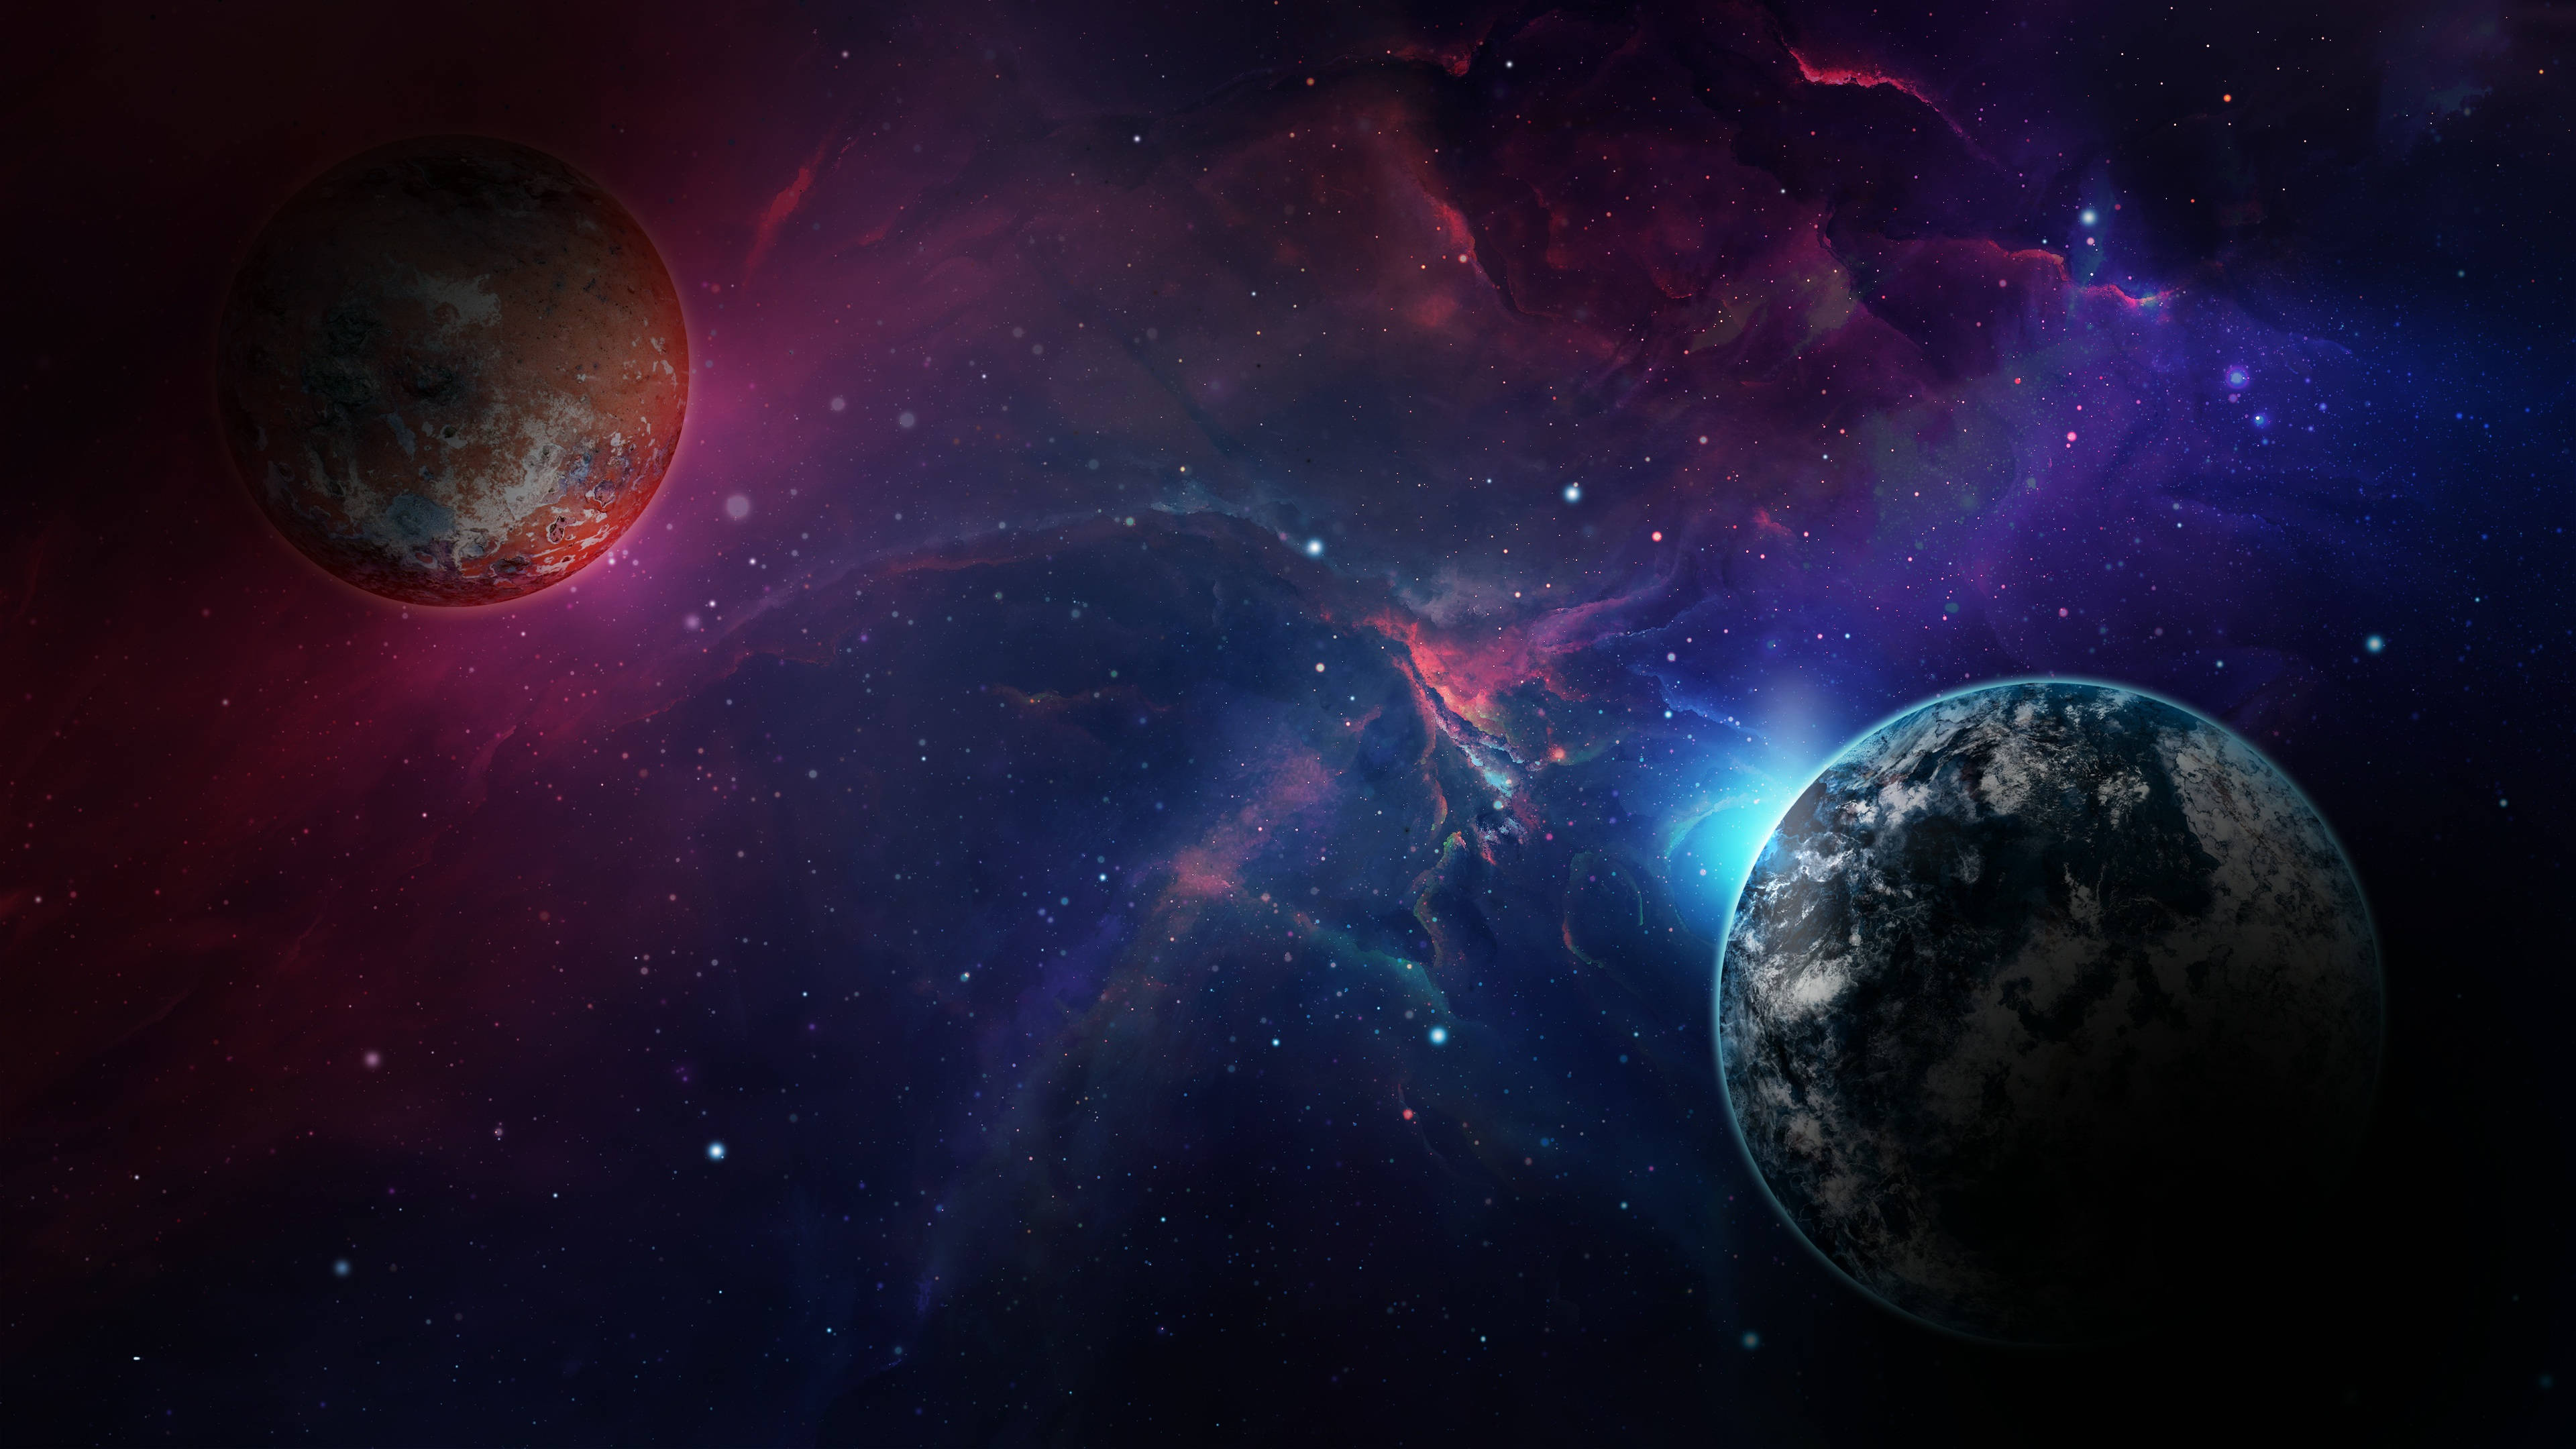 Two Planets In A Colorful Galaxy Wallpaper